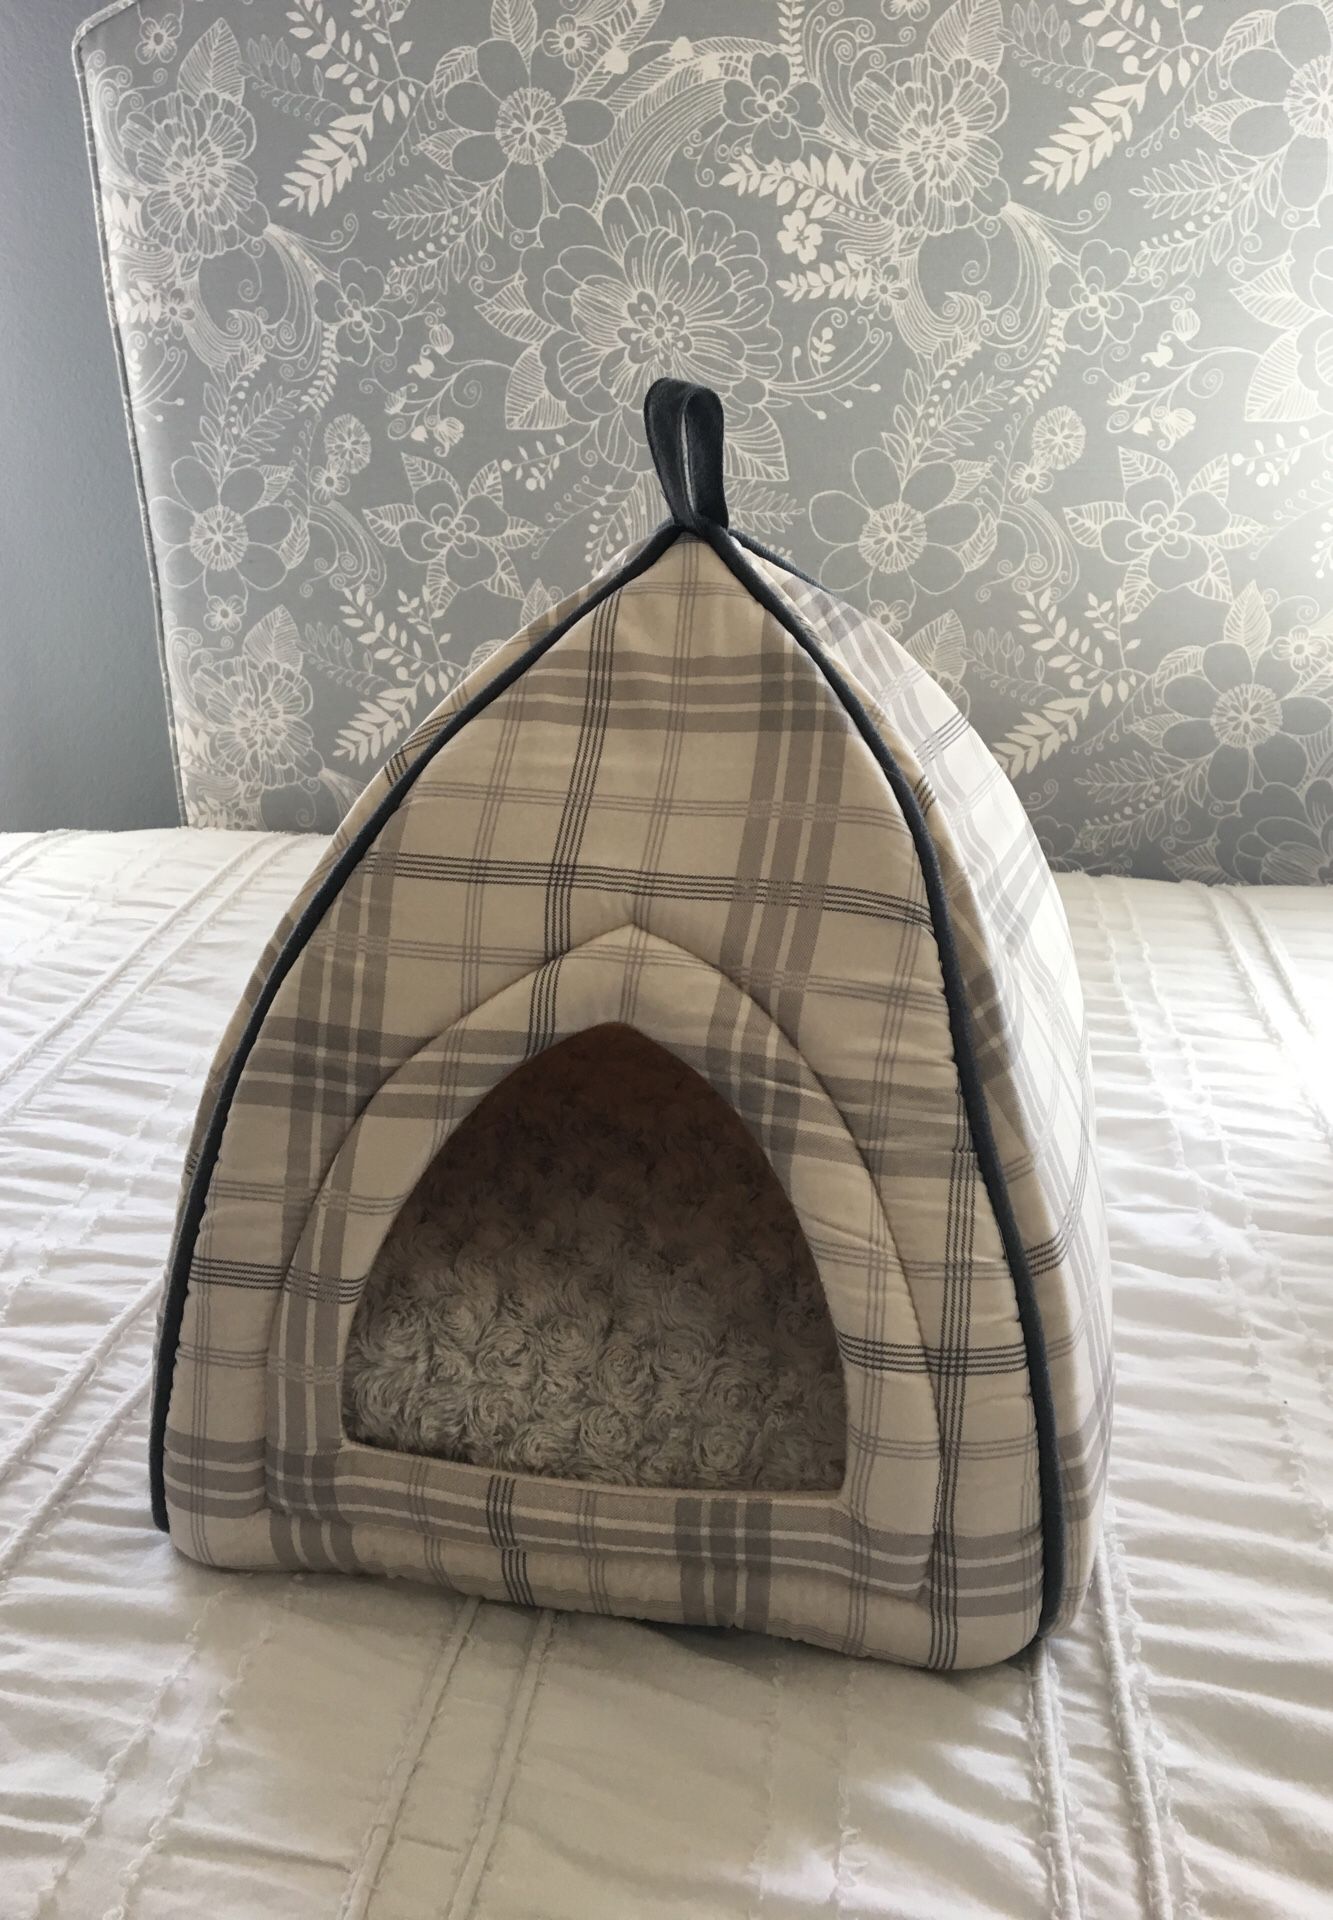 Cat/Dog house for sale!!!